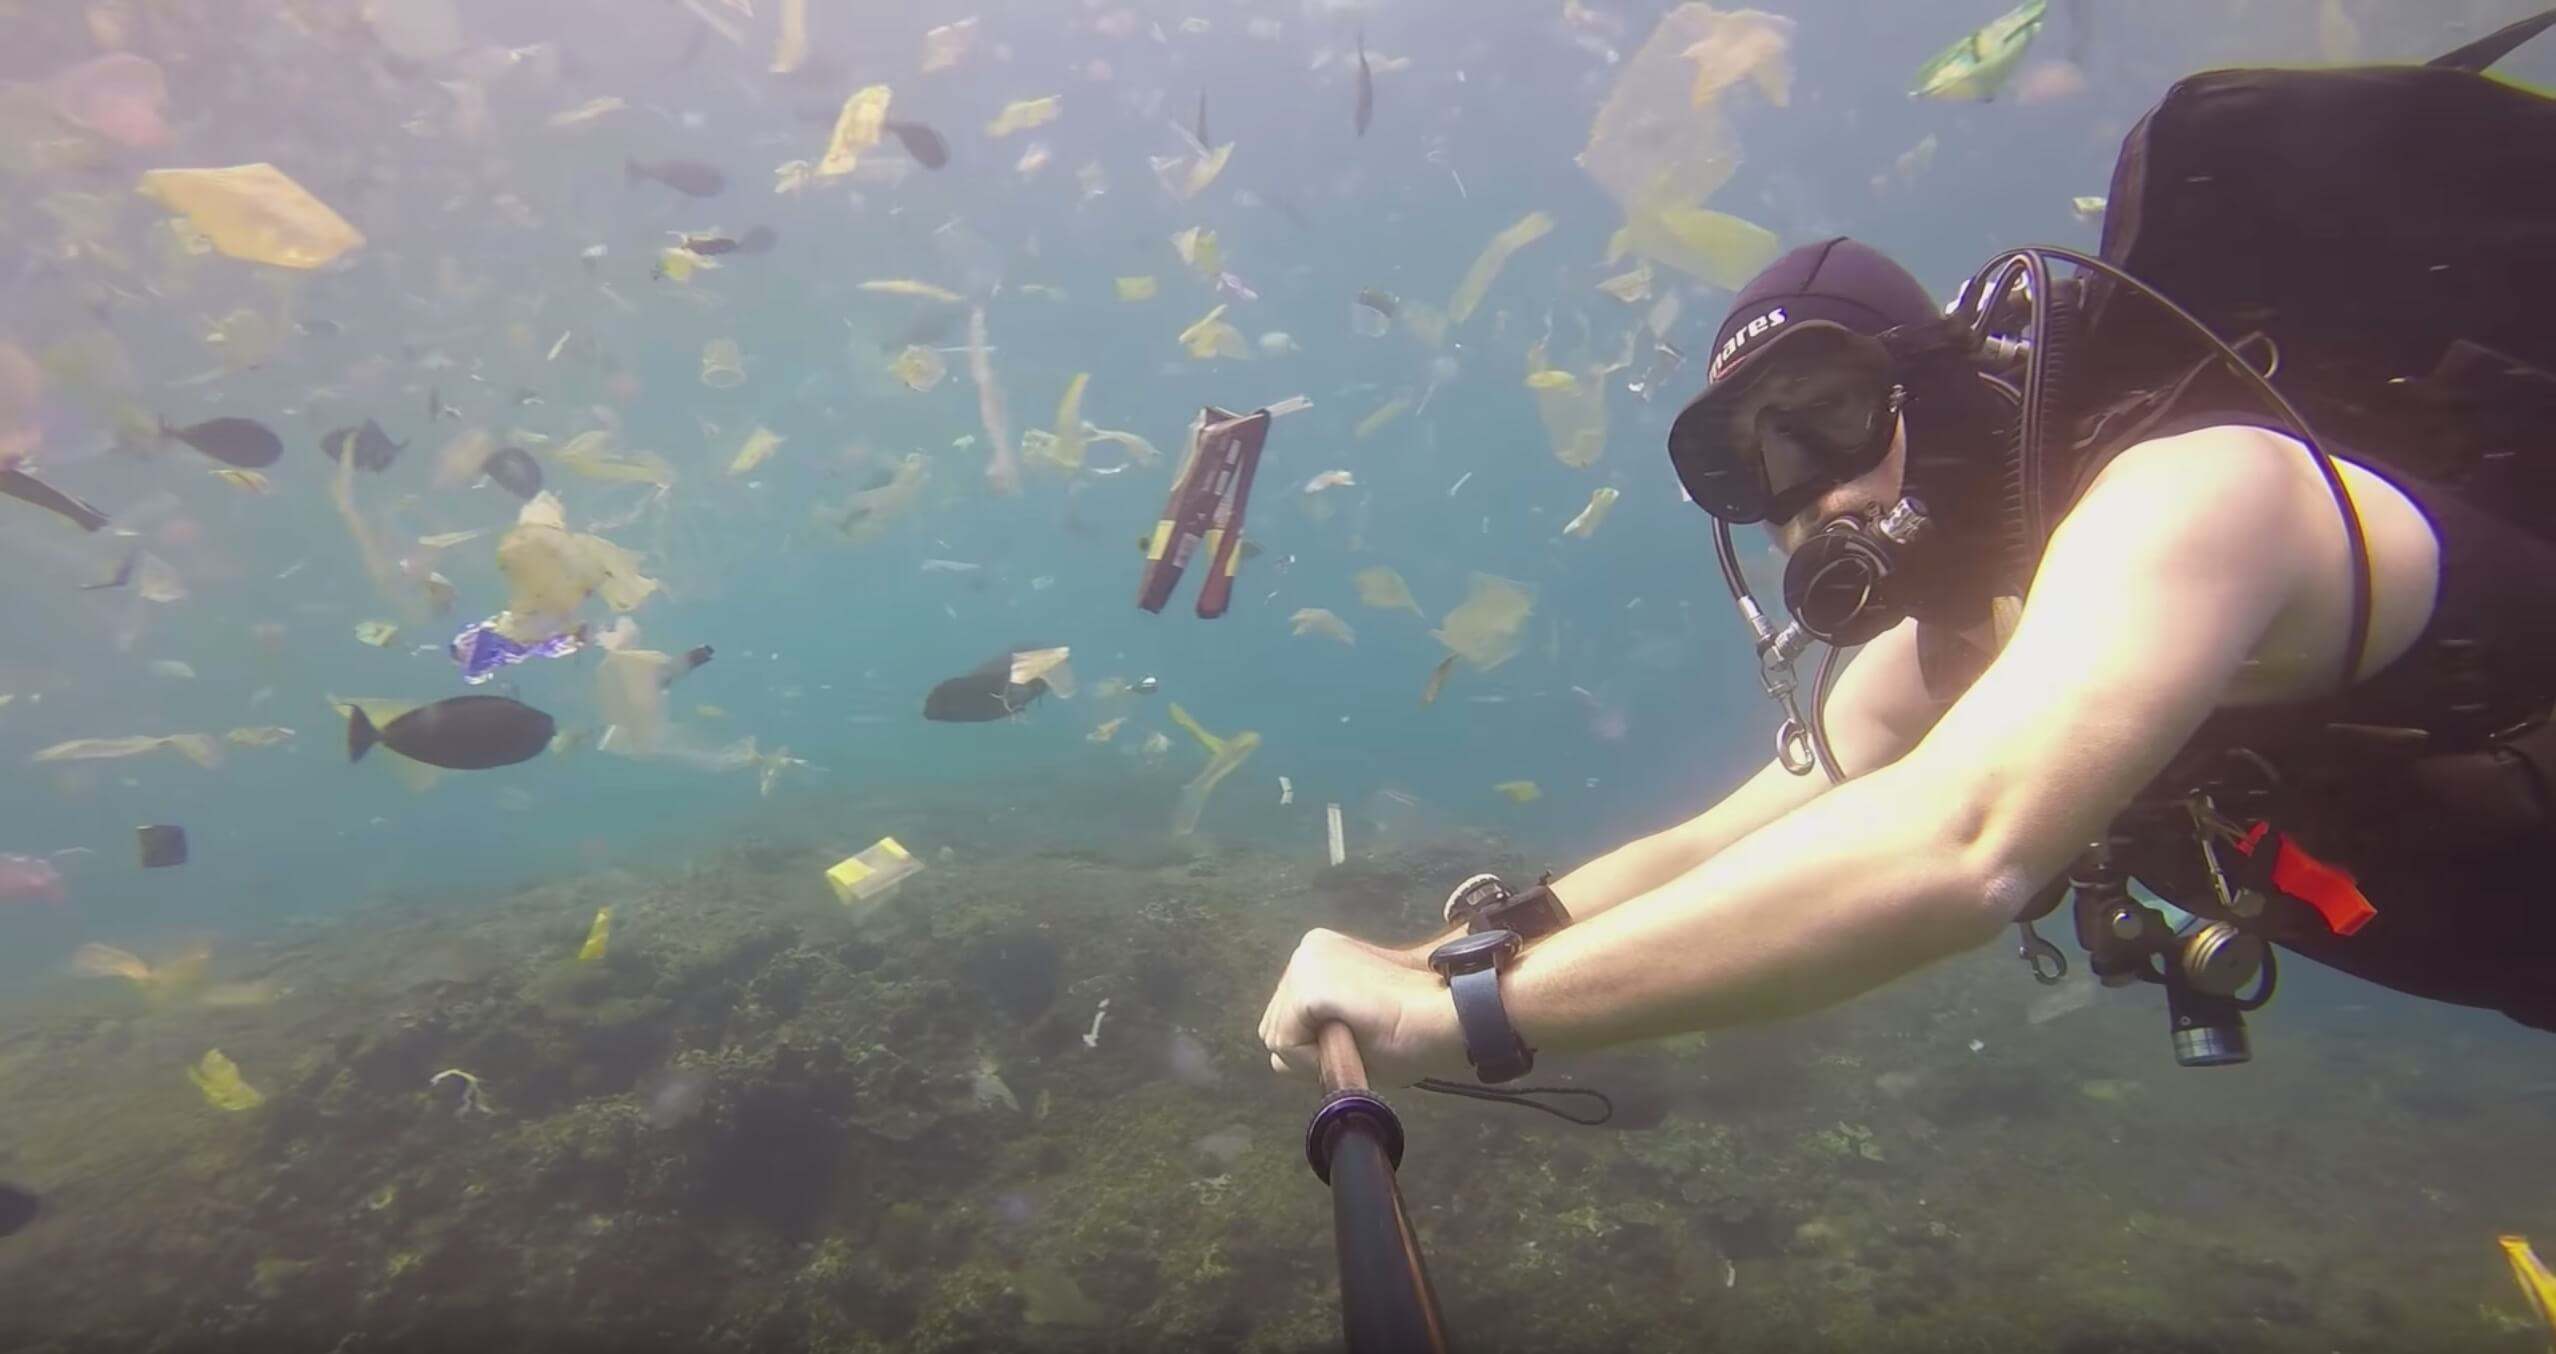 Plastic, plastic, so much plastic - can a viral video change how we view ocean waste?